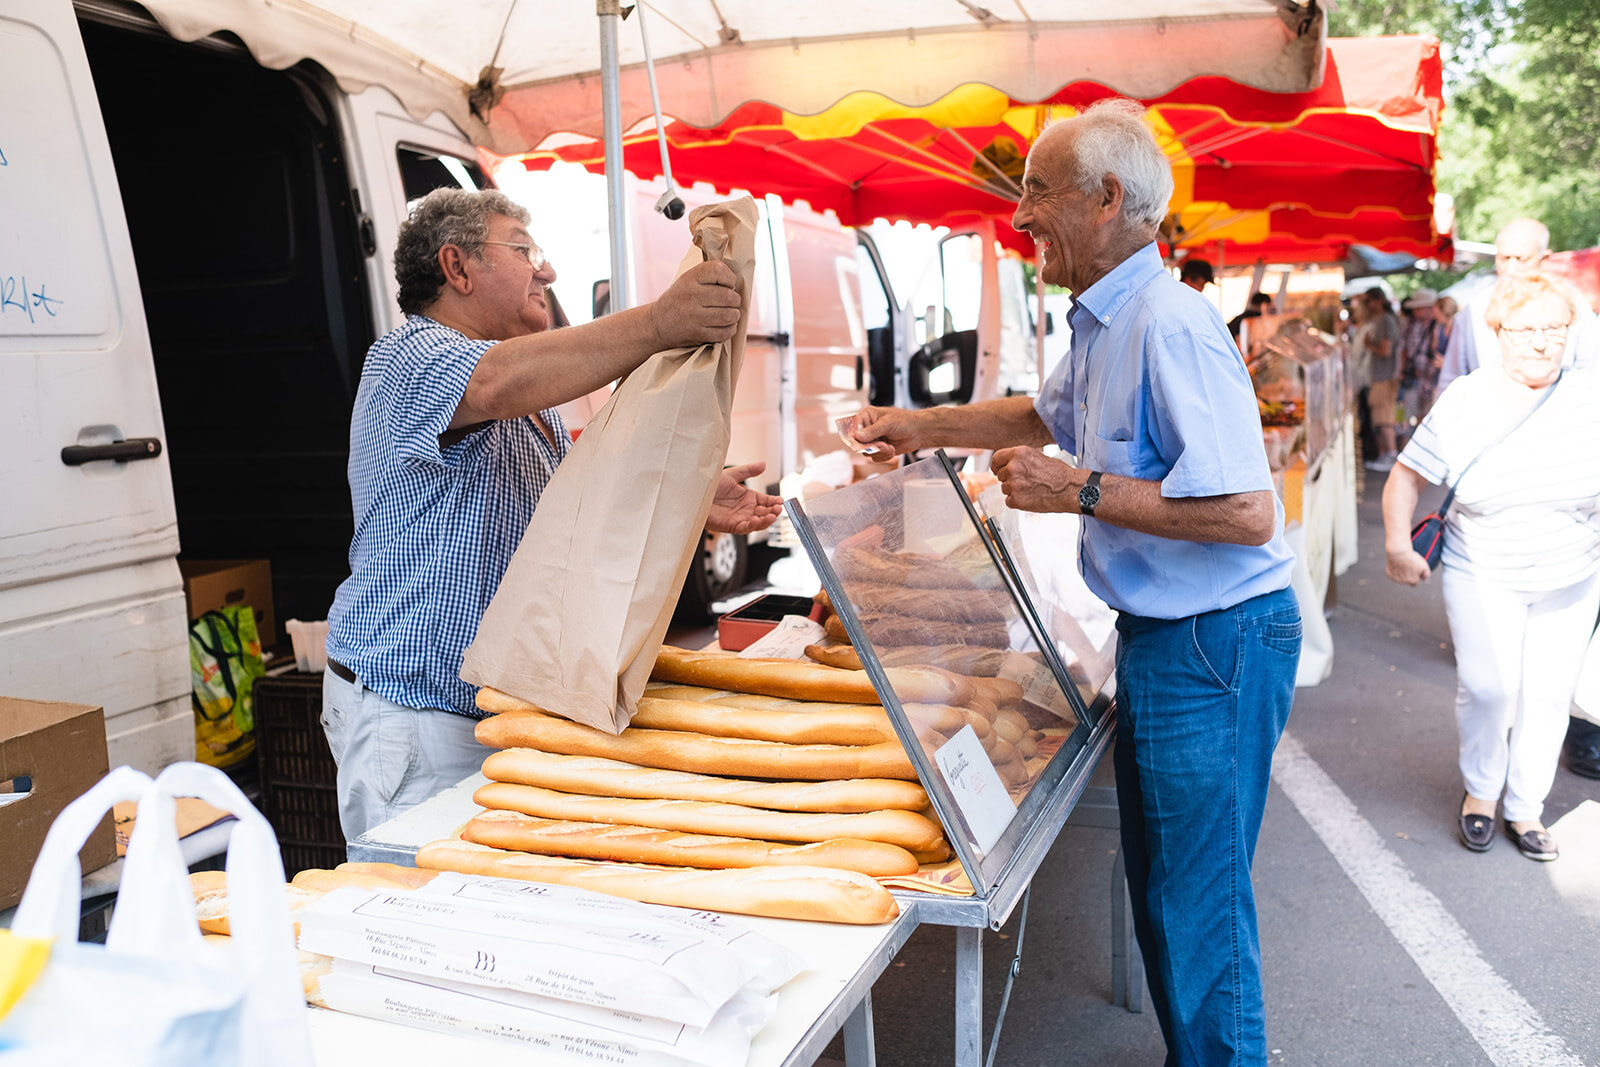 A man buys bread at the market in Arles